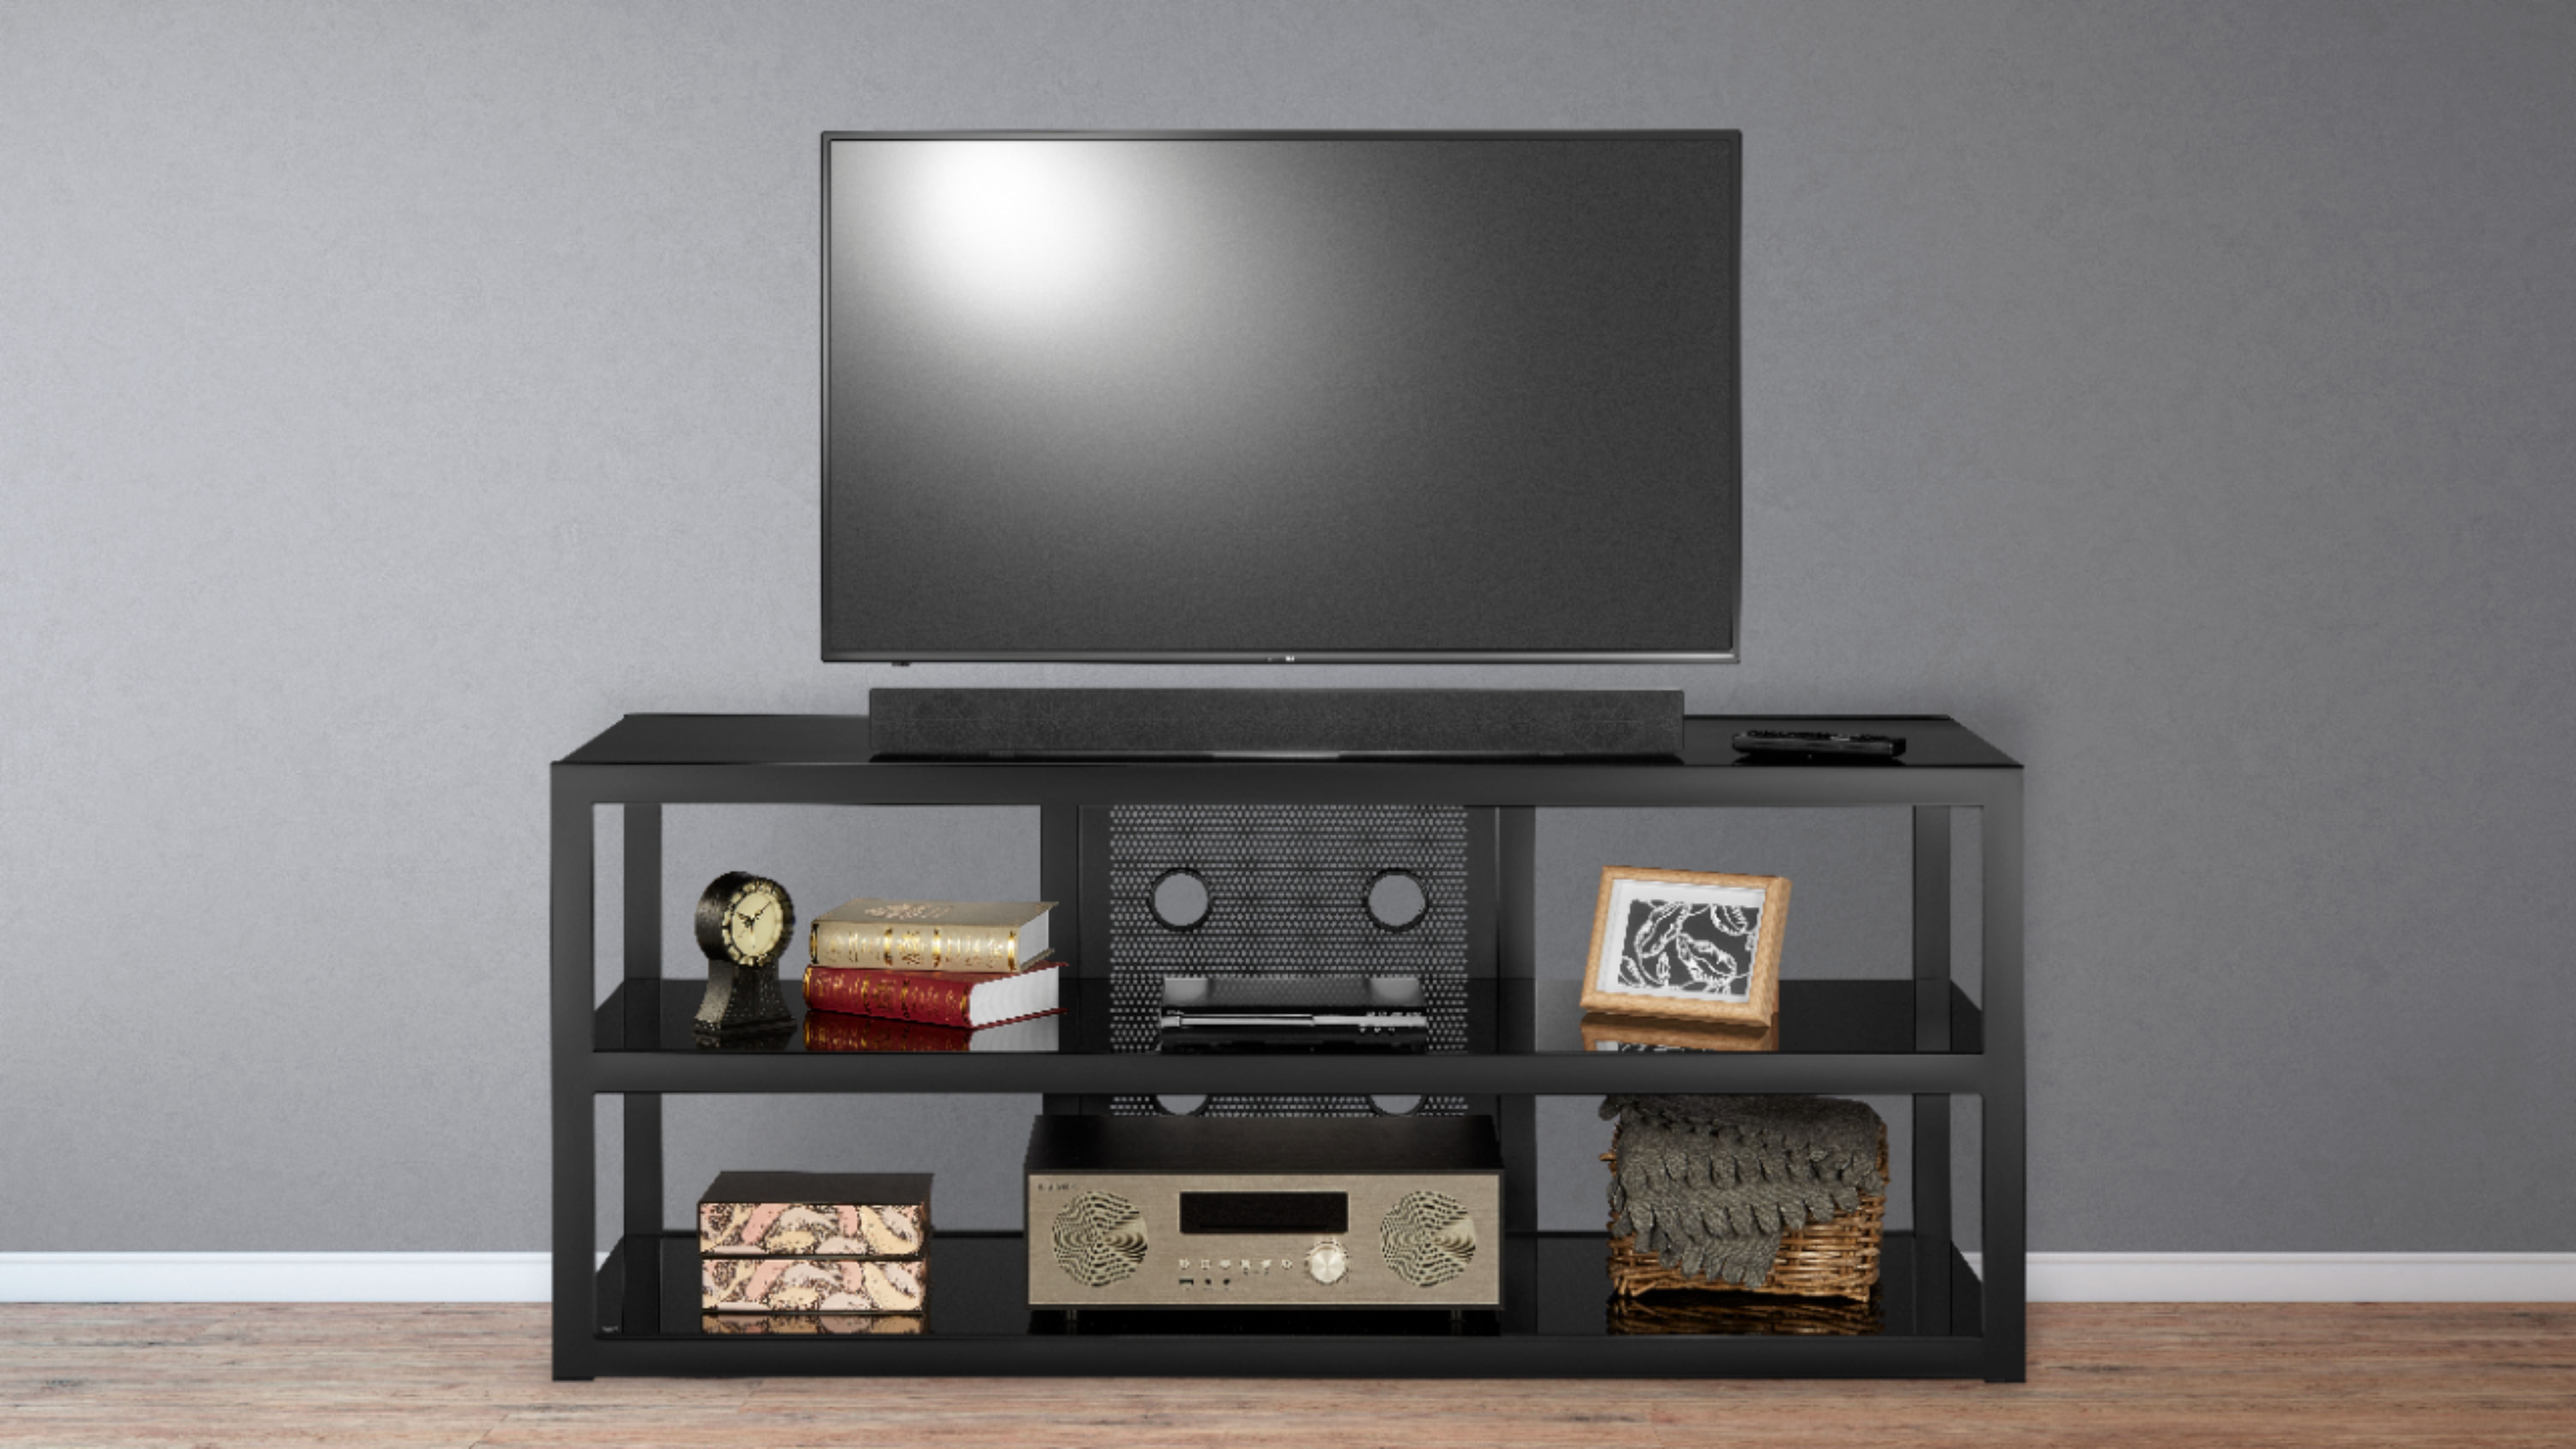 Insignia™ TV Stand for Most Flat-Panel TVs Up to 60 Mocha NS-HWMG1754M -  Best Buy